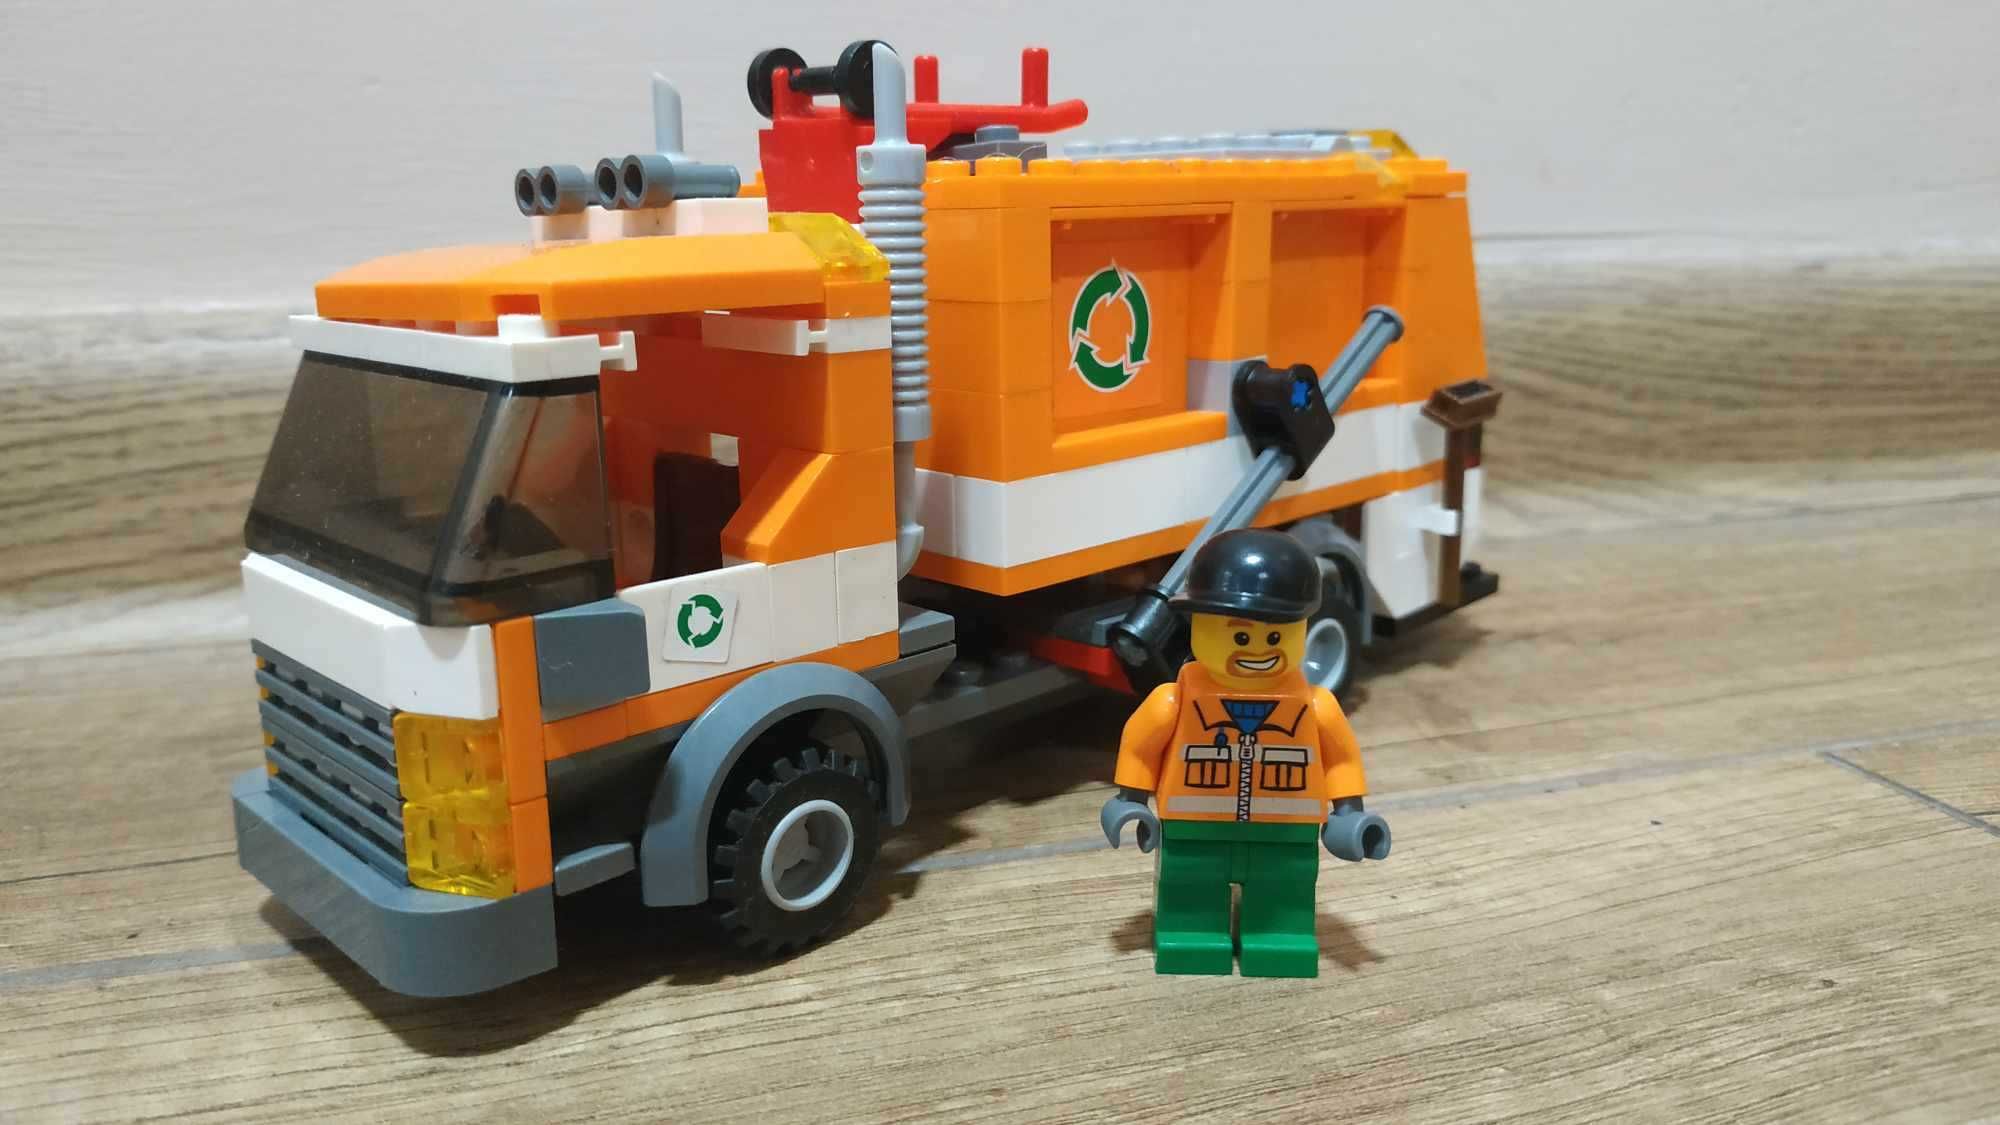 Lego City 7991 ,,Recycle Truck"